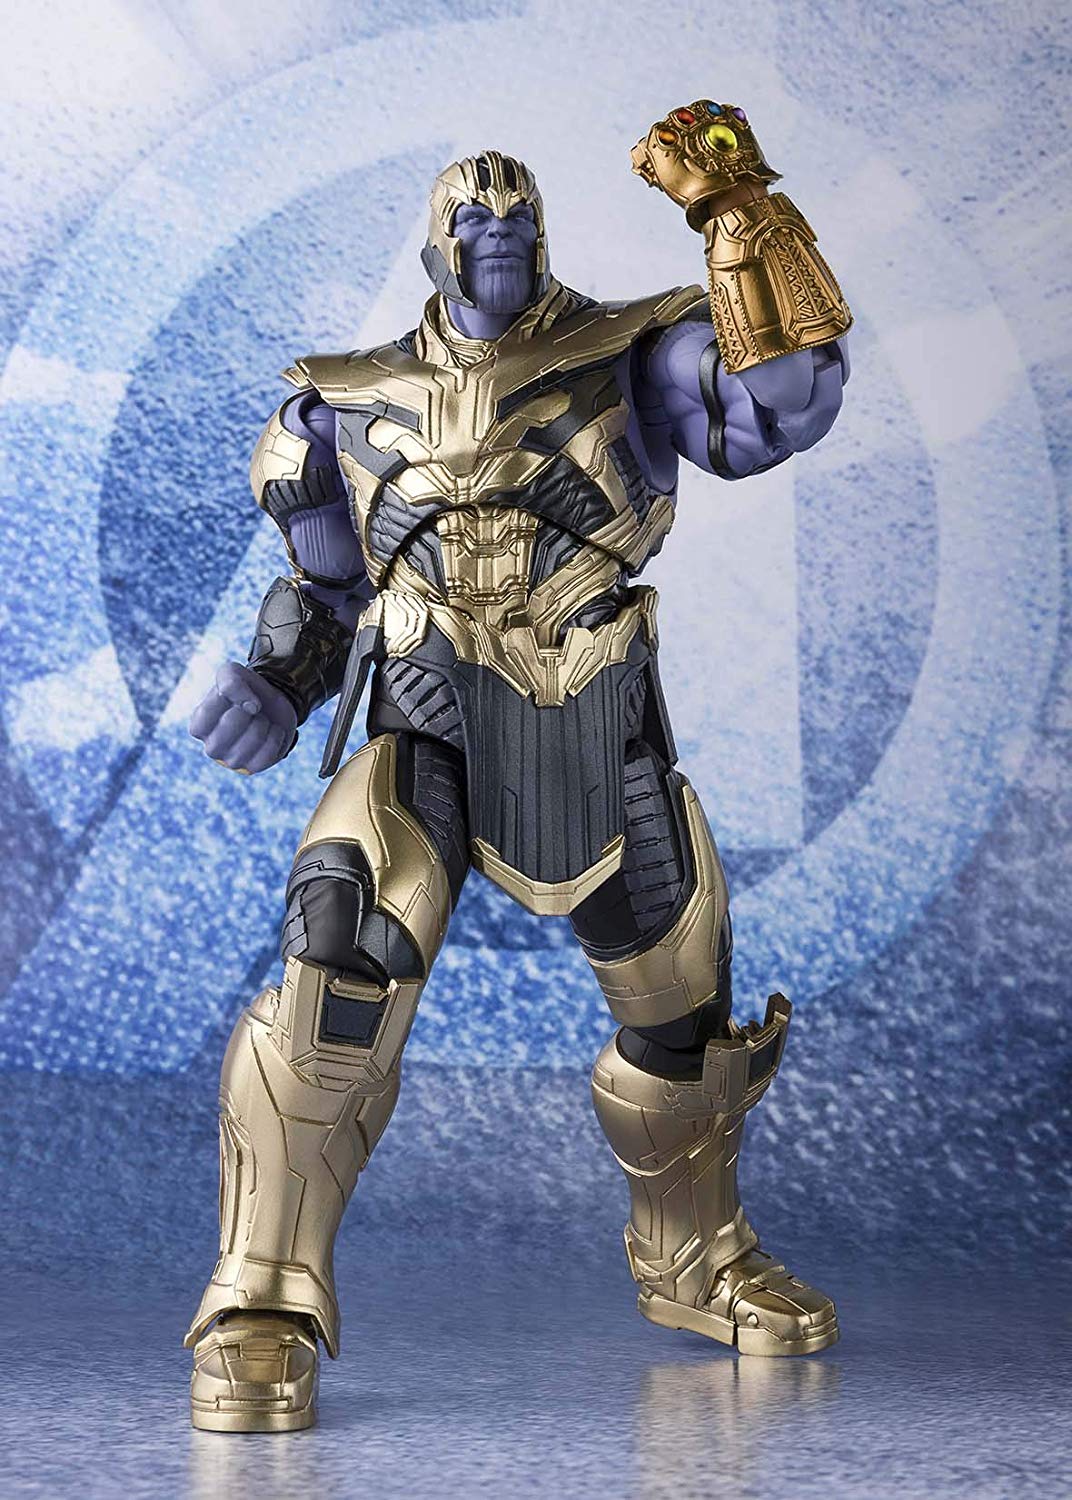 SH Figuarts Endgame Thanos Figure Up for Order in the US! - SH Figuarts Avengers EnDgame Thanos Figure